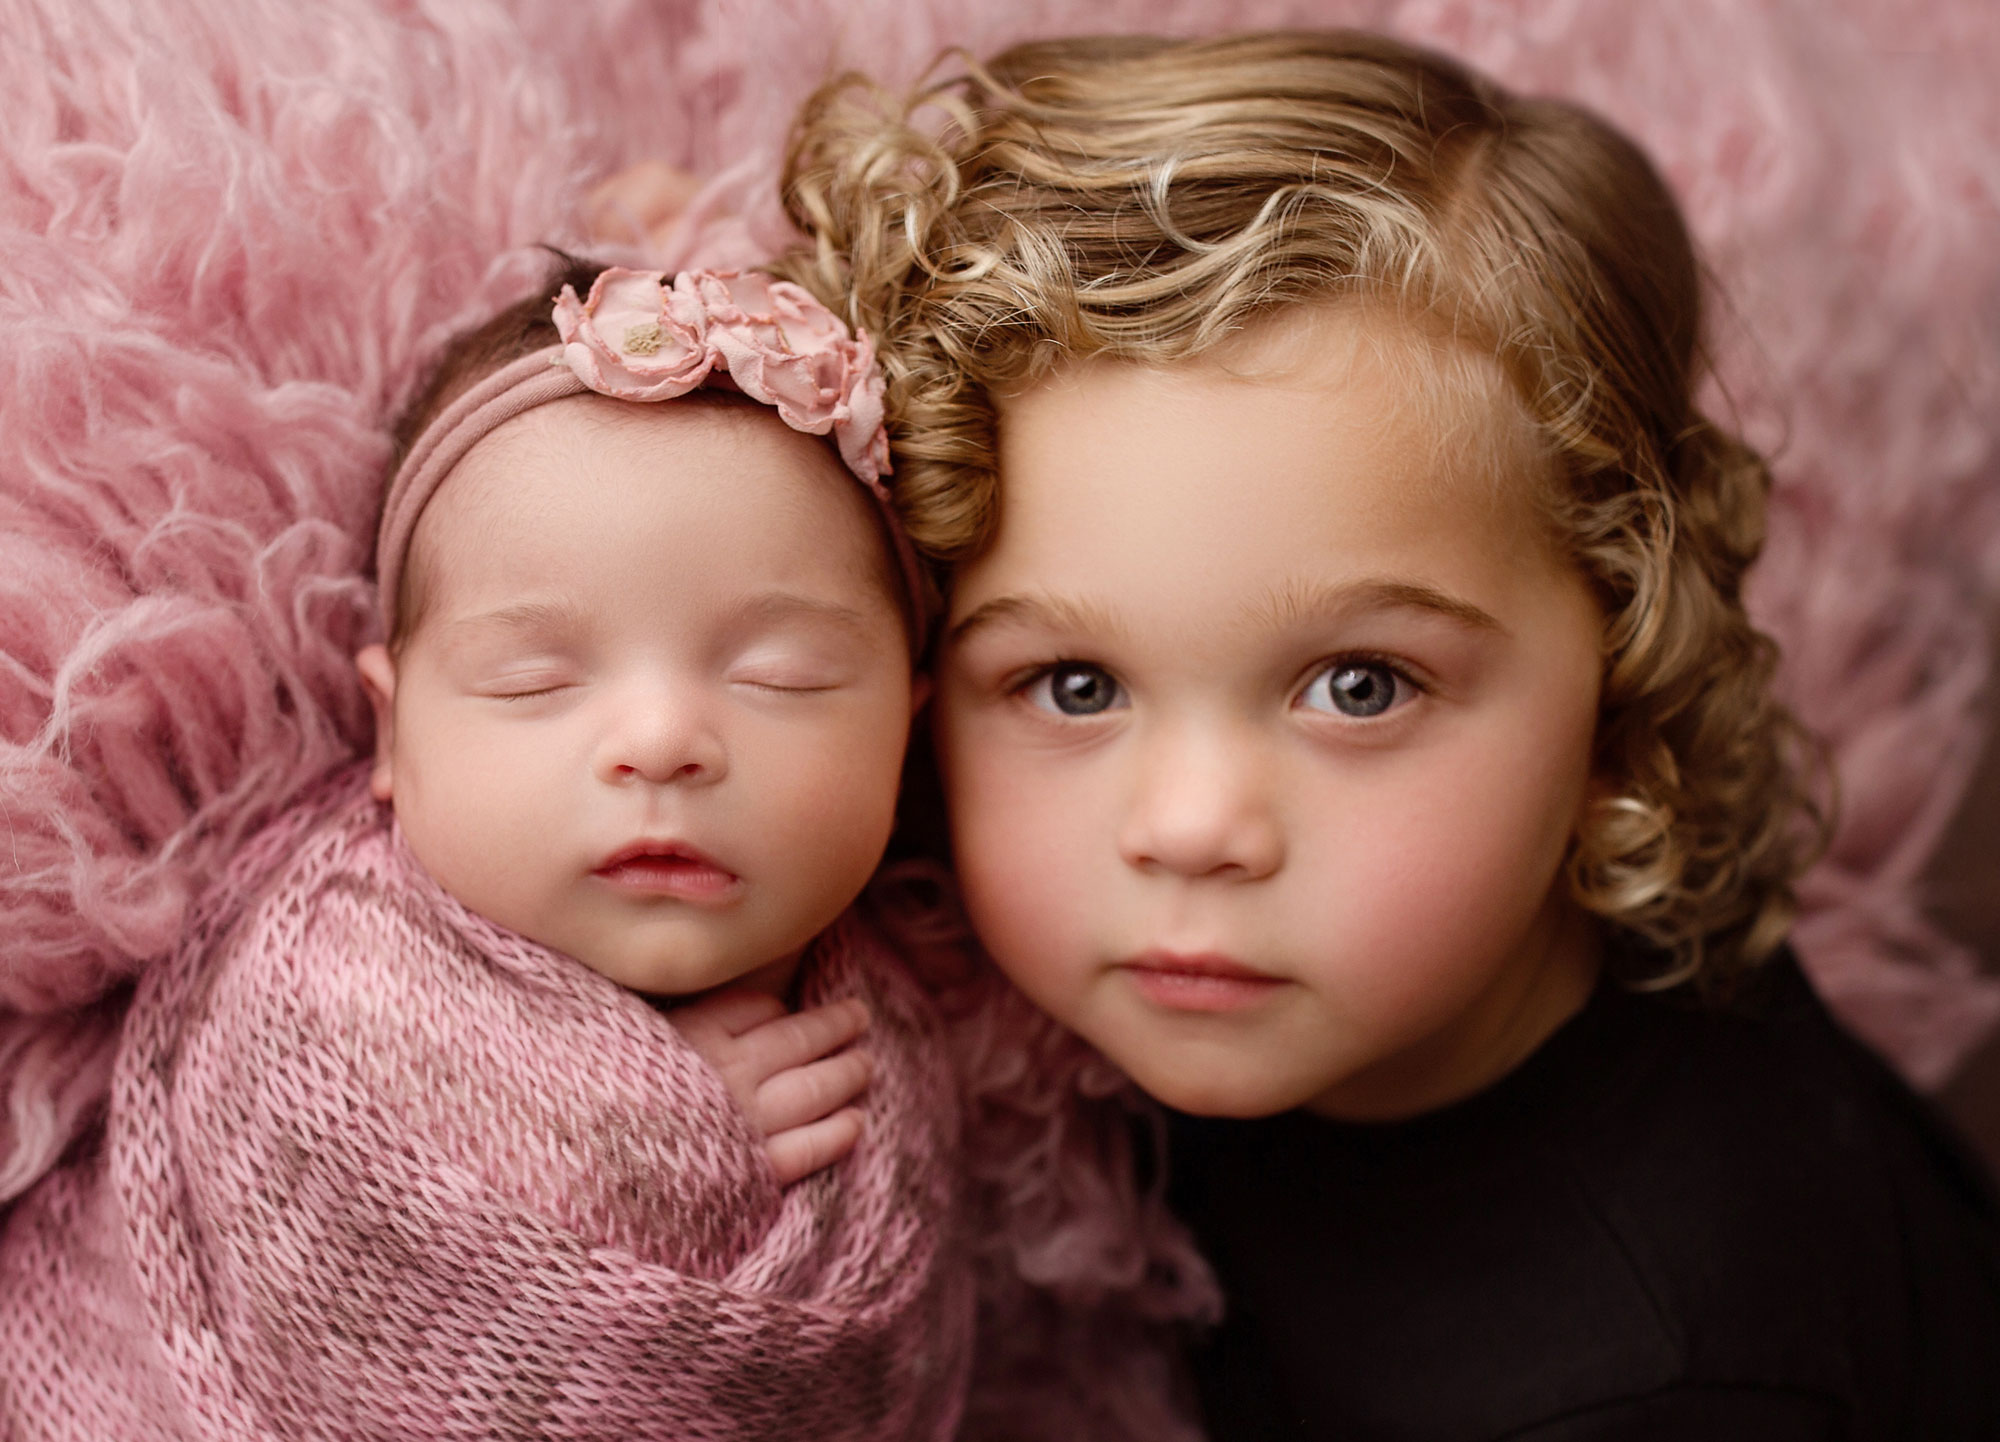 baby and child photographer morris county nj, baby girl asleep next to brother